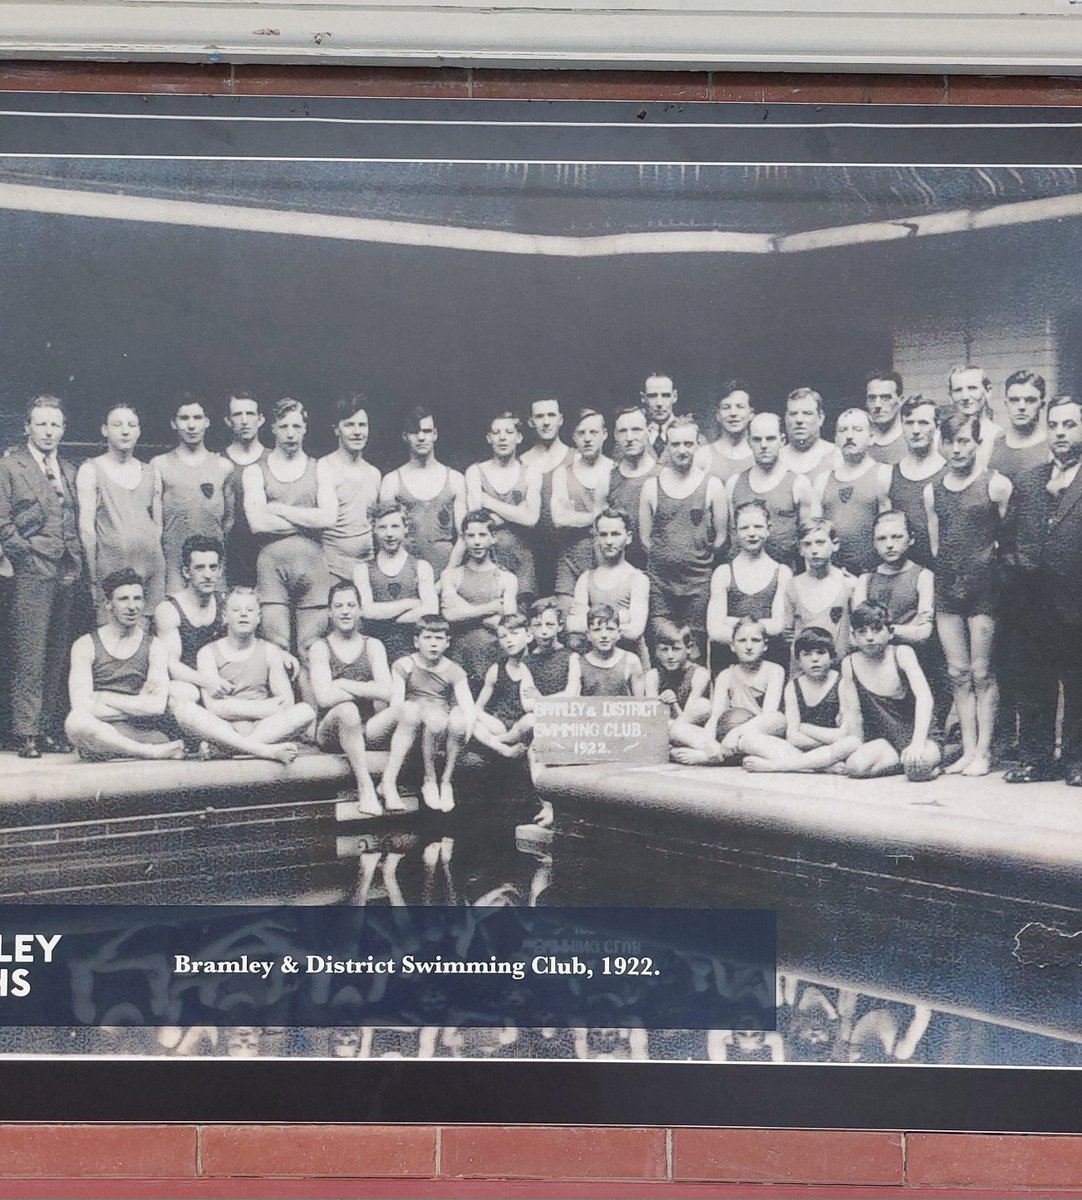 We LOVE this picture from 1922 from our archive and featured in our #heritage exhibition 📷 The variety of swimwear and the 'gaffa's' in their best suits

#swimteam #community #morethanapool #swimclub